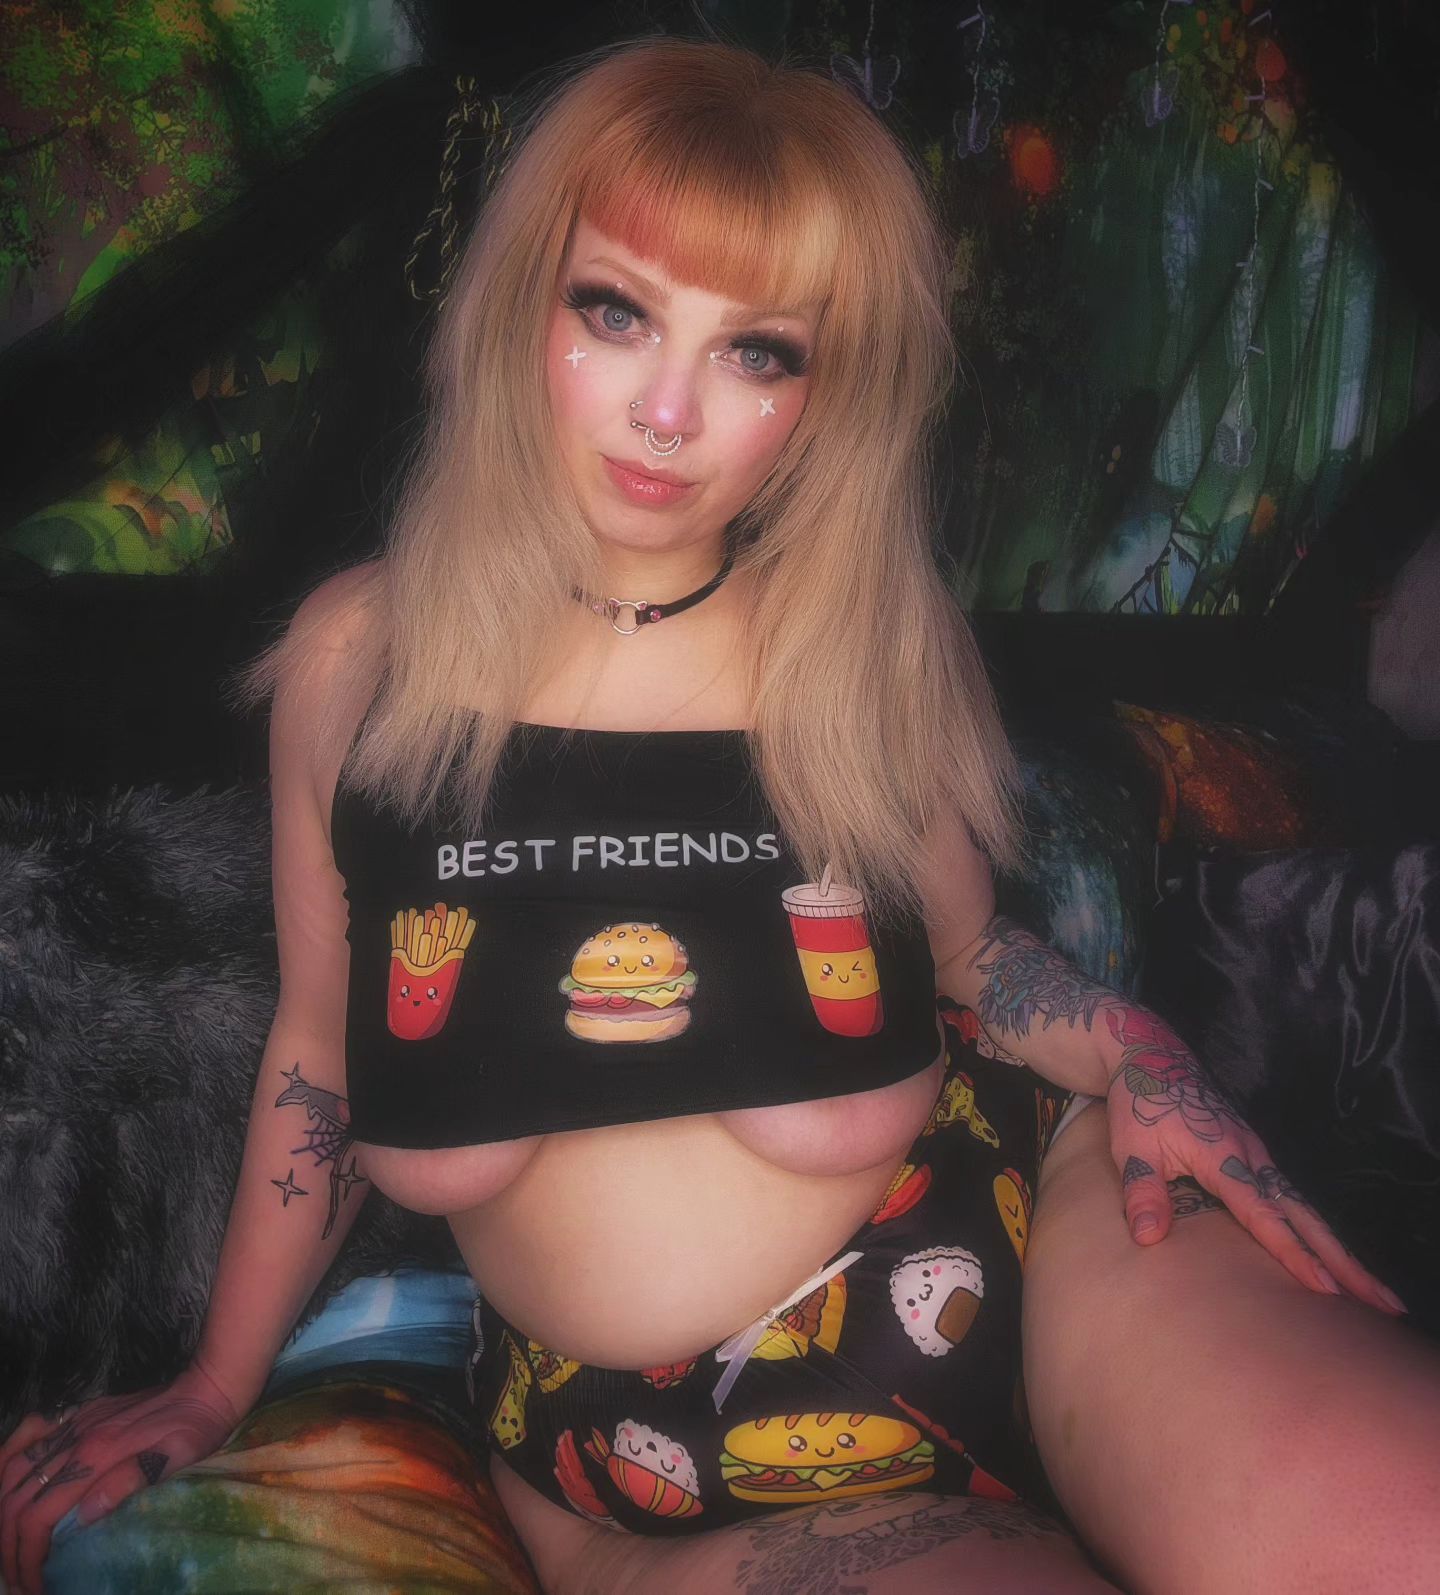 Burger or me for dinner? Either way, you should send $$ to feed me a burger 🍔🍟✨️